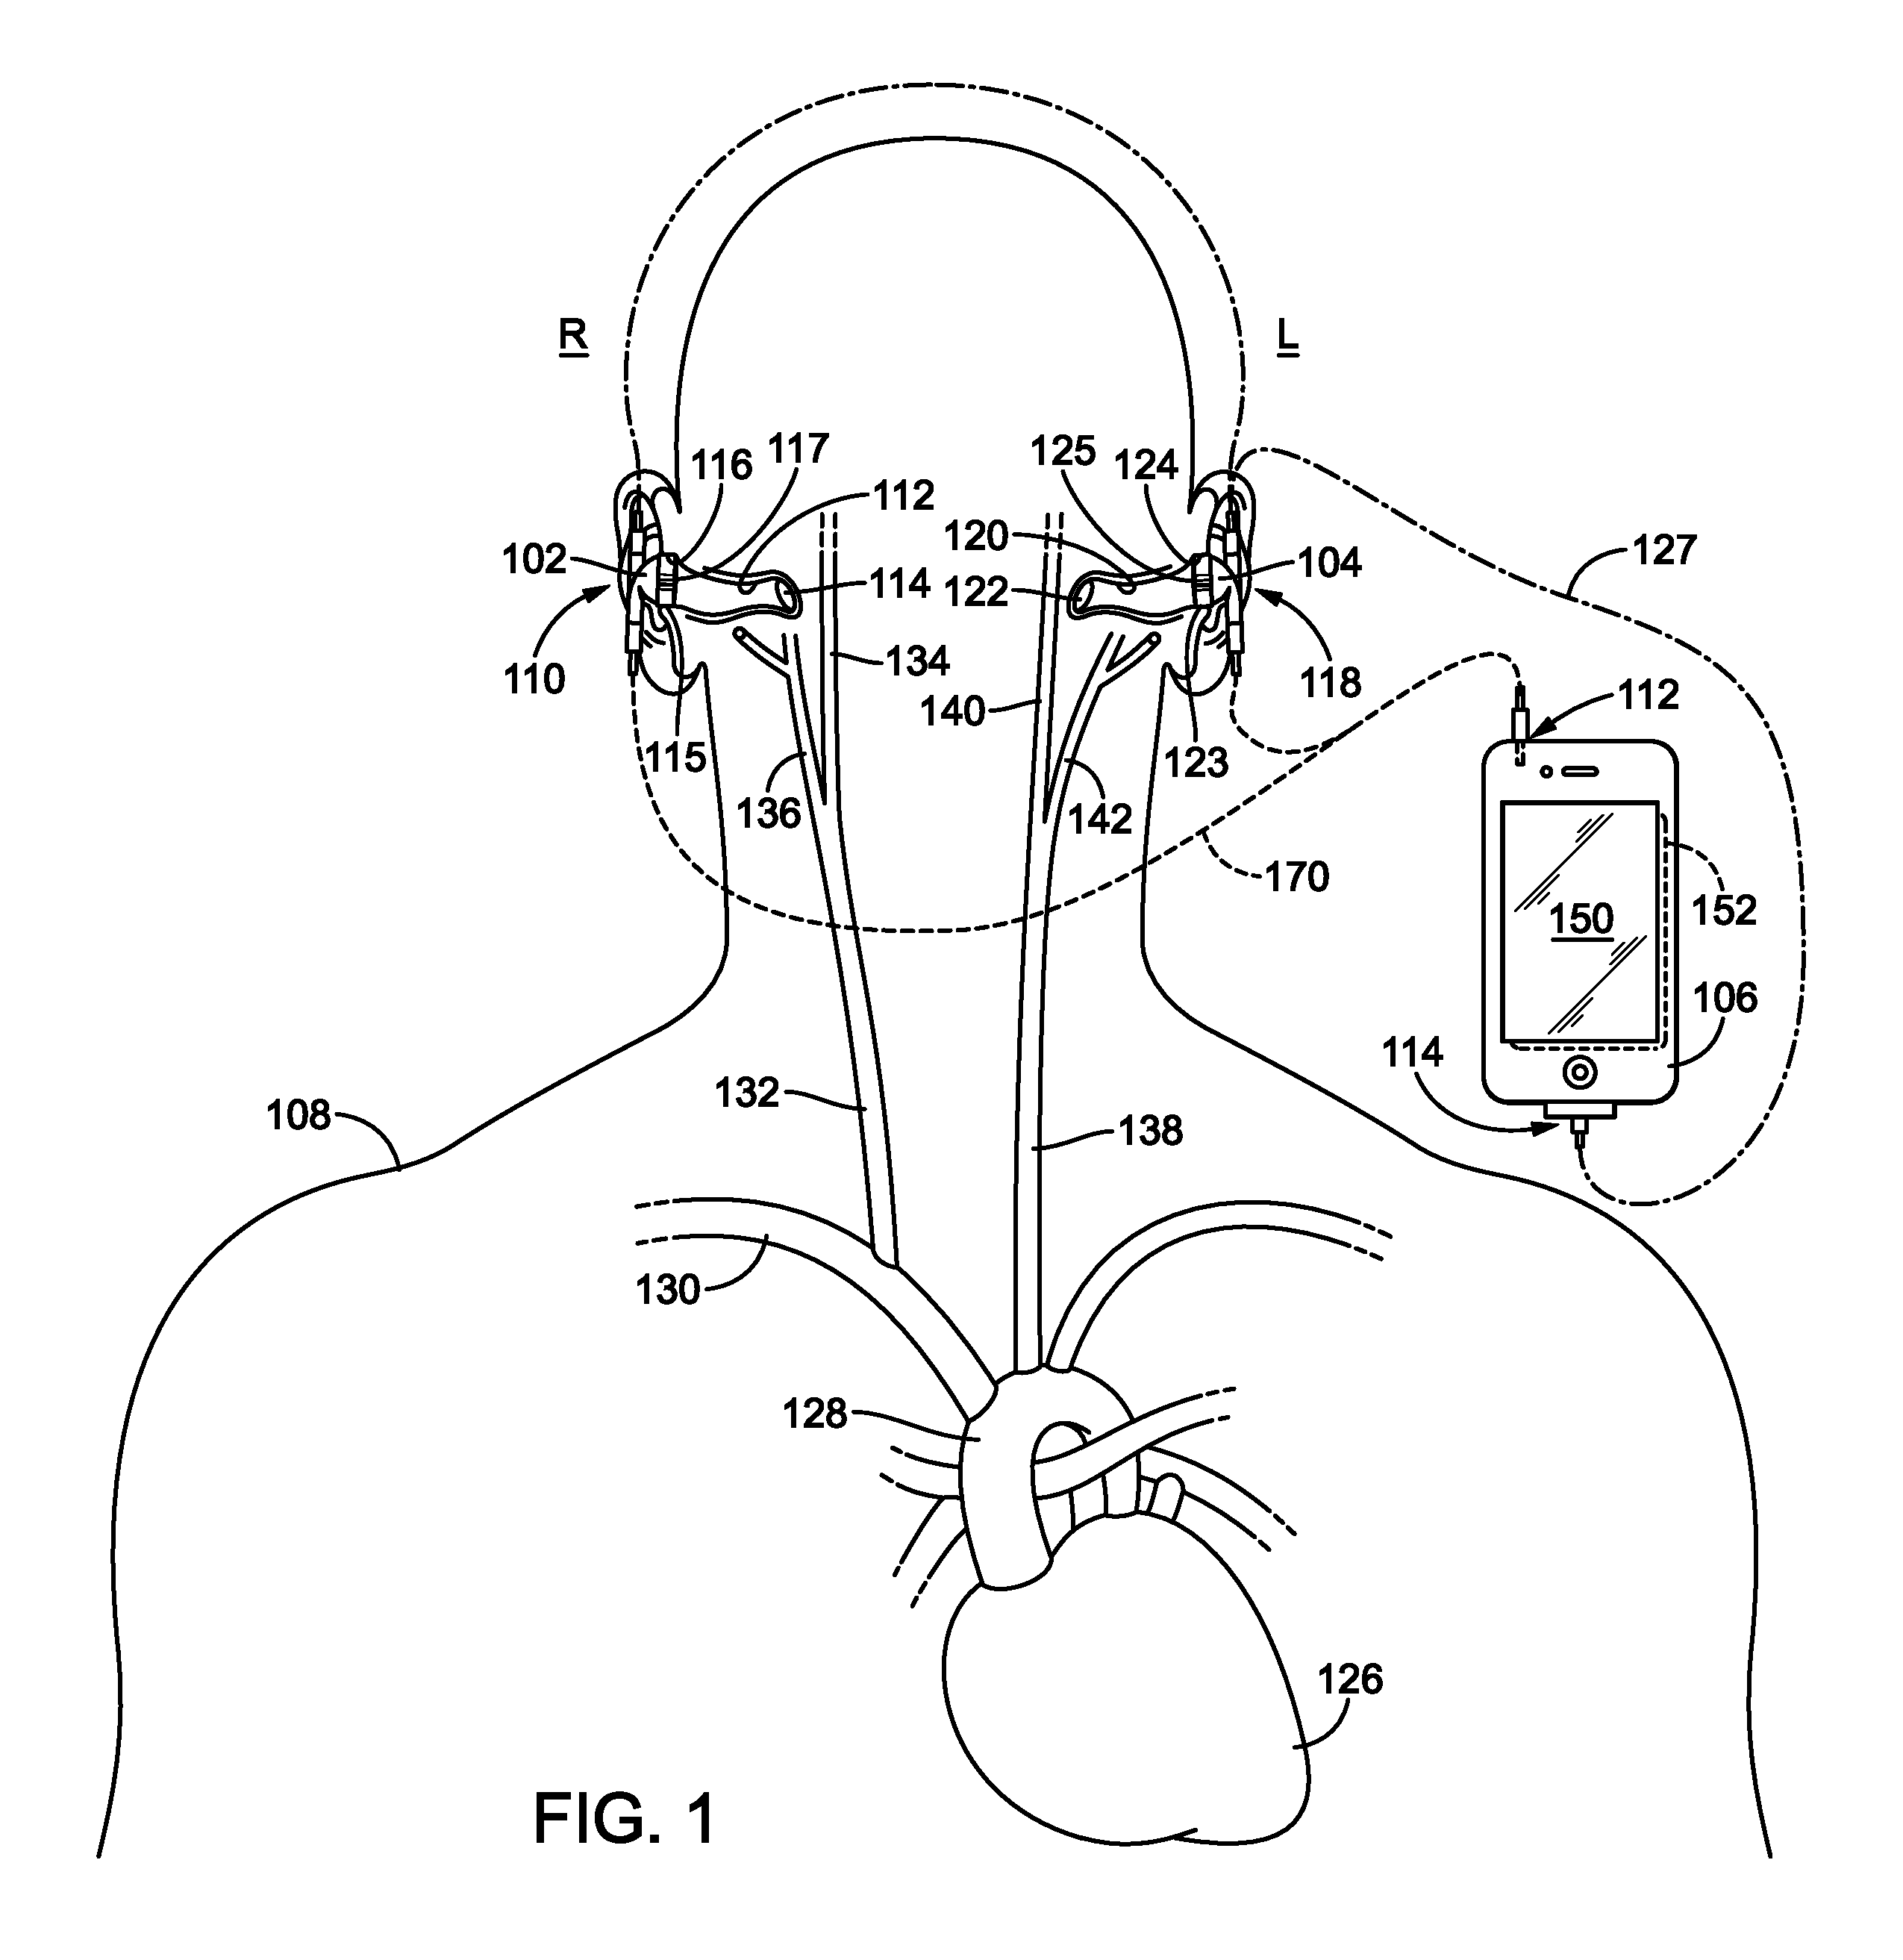 Obtaining physiological measurements using ear-located sensors